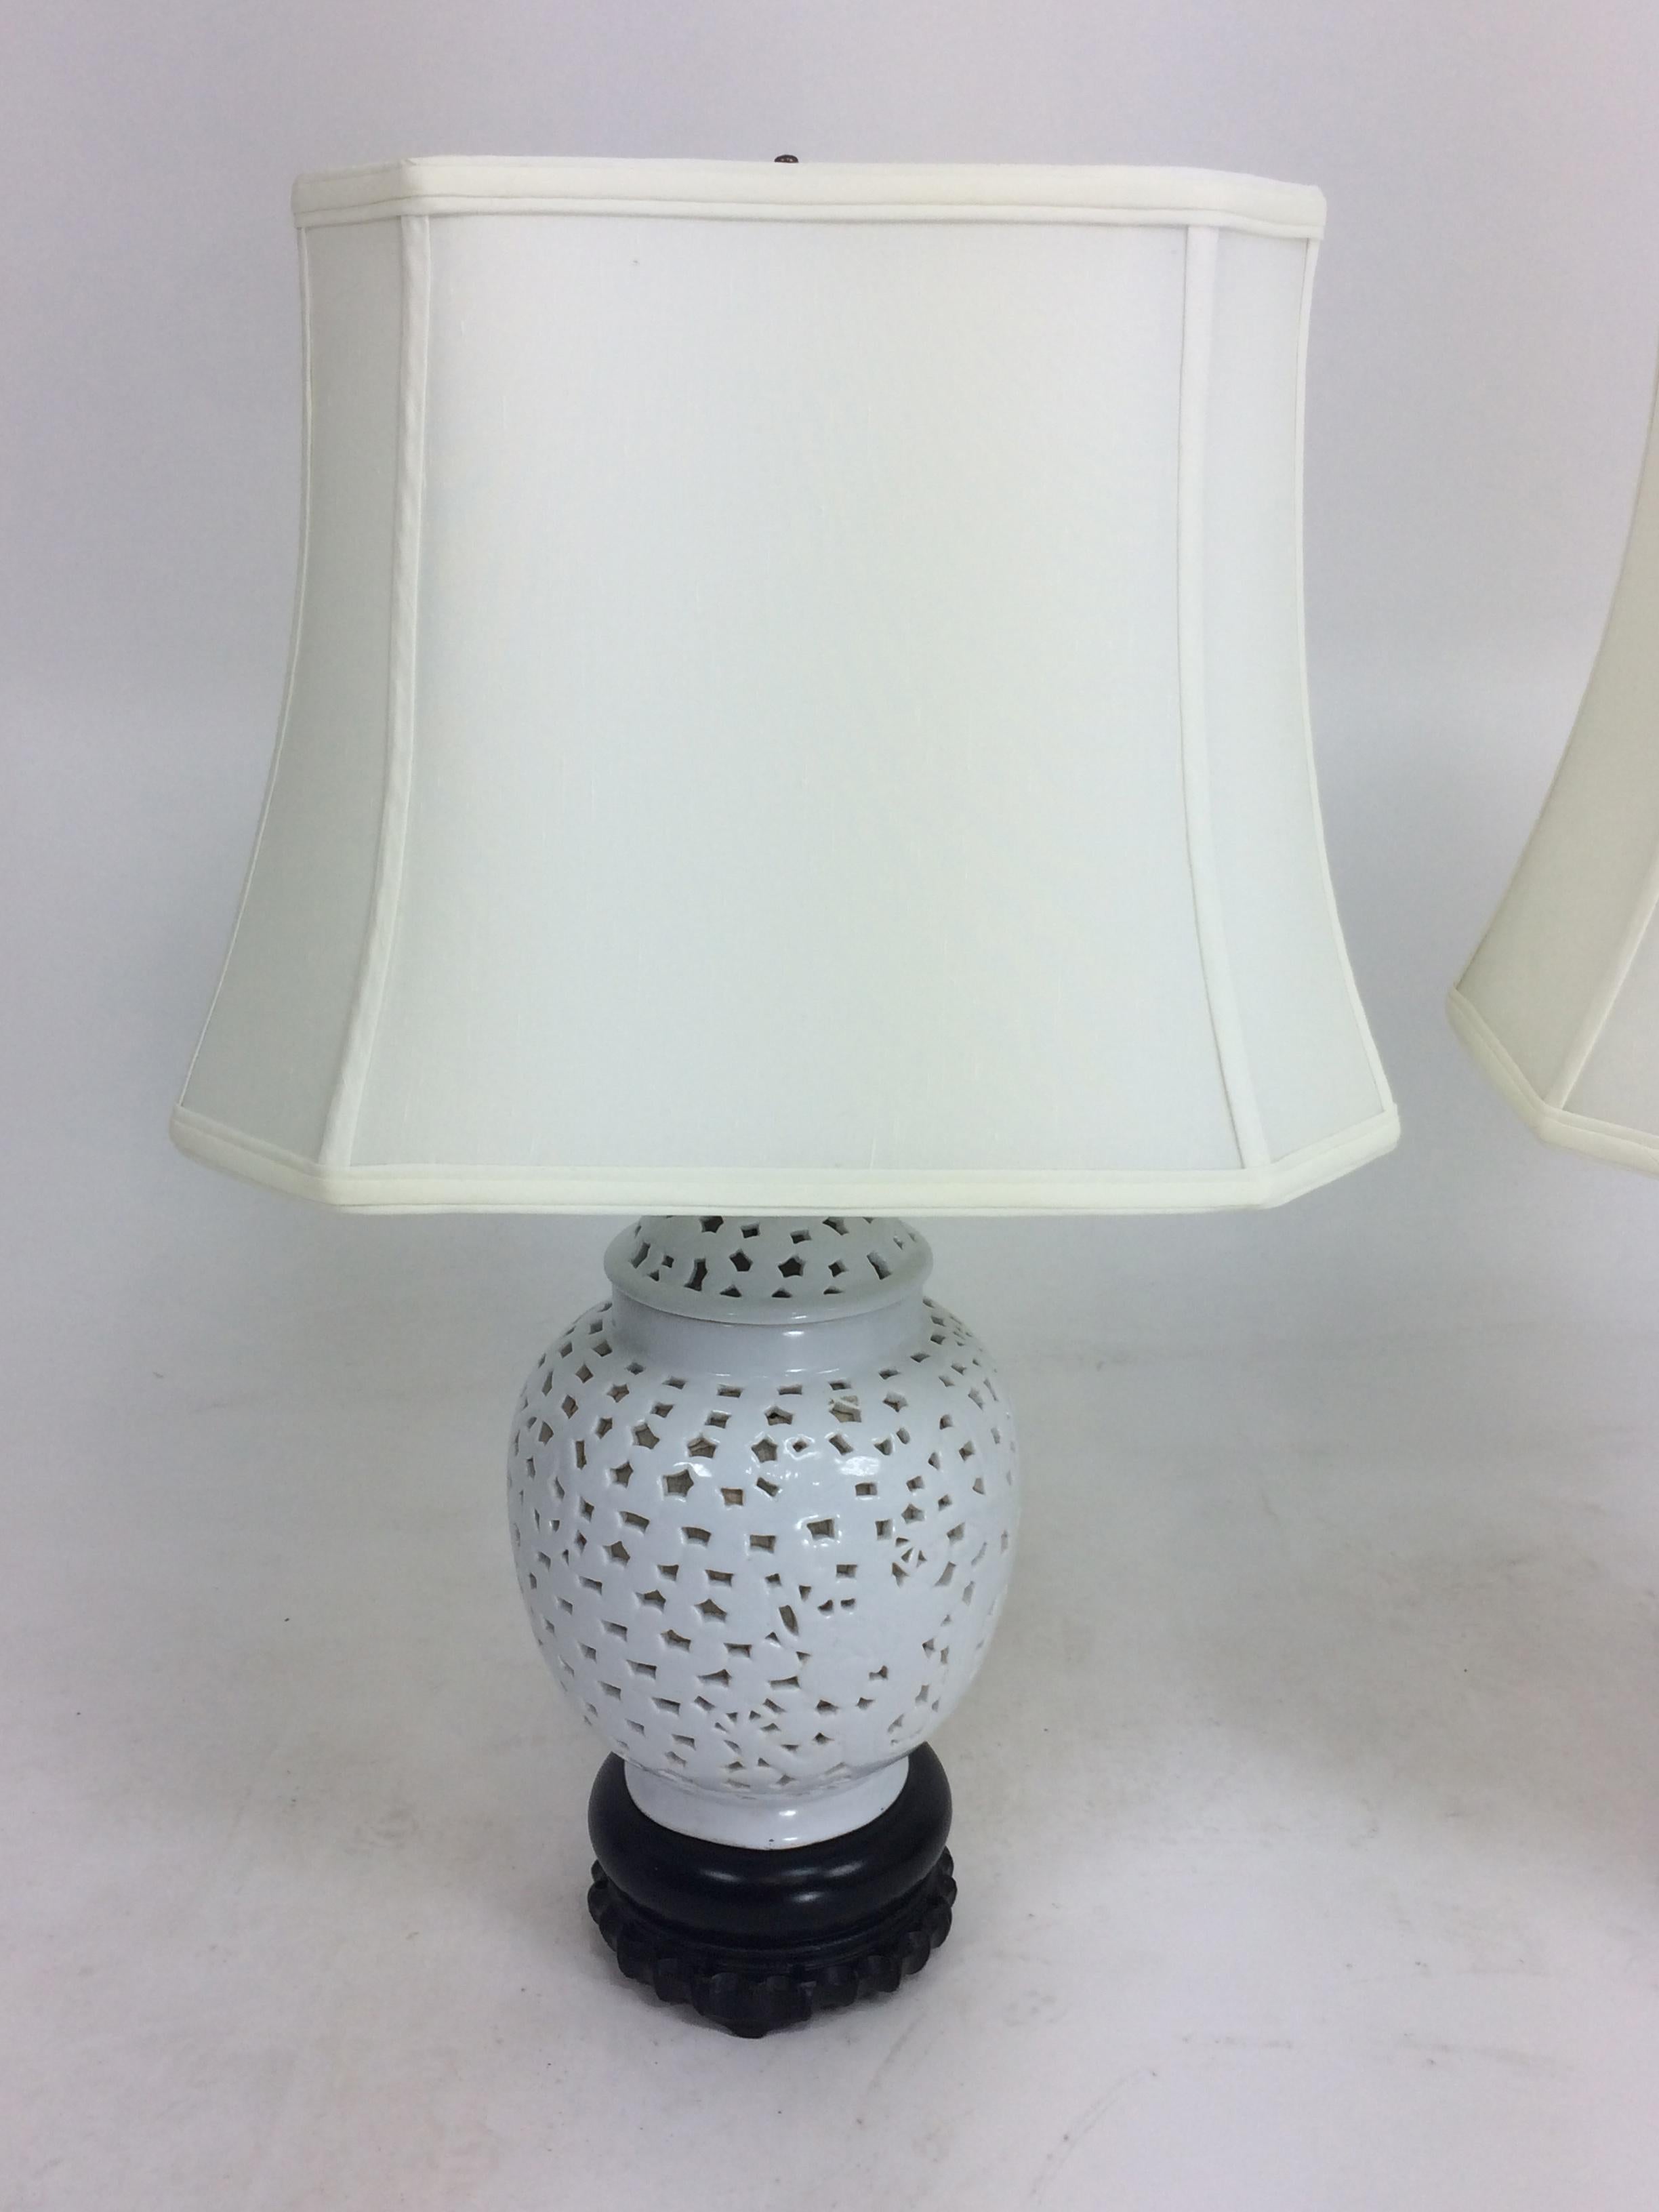 Pair of Blanc de Chine table lamps with shades. On wooden bases both in excellent original condition from the 1980s. 24.5 inches to top of shade 15